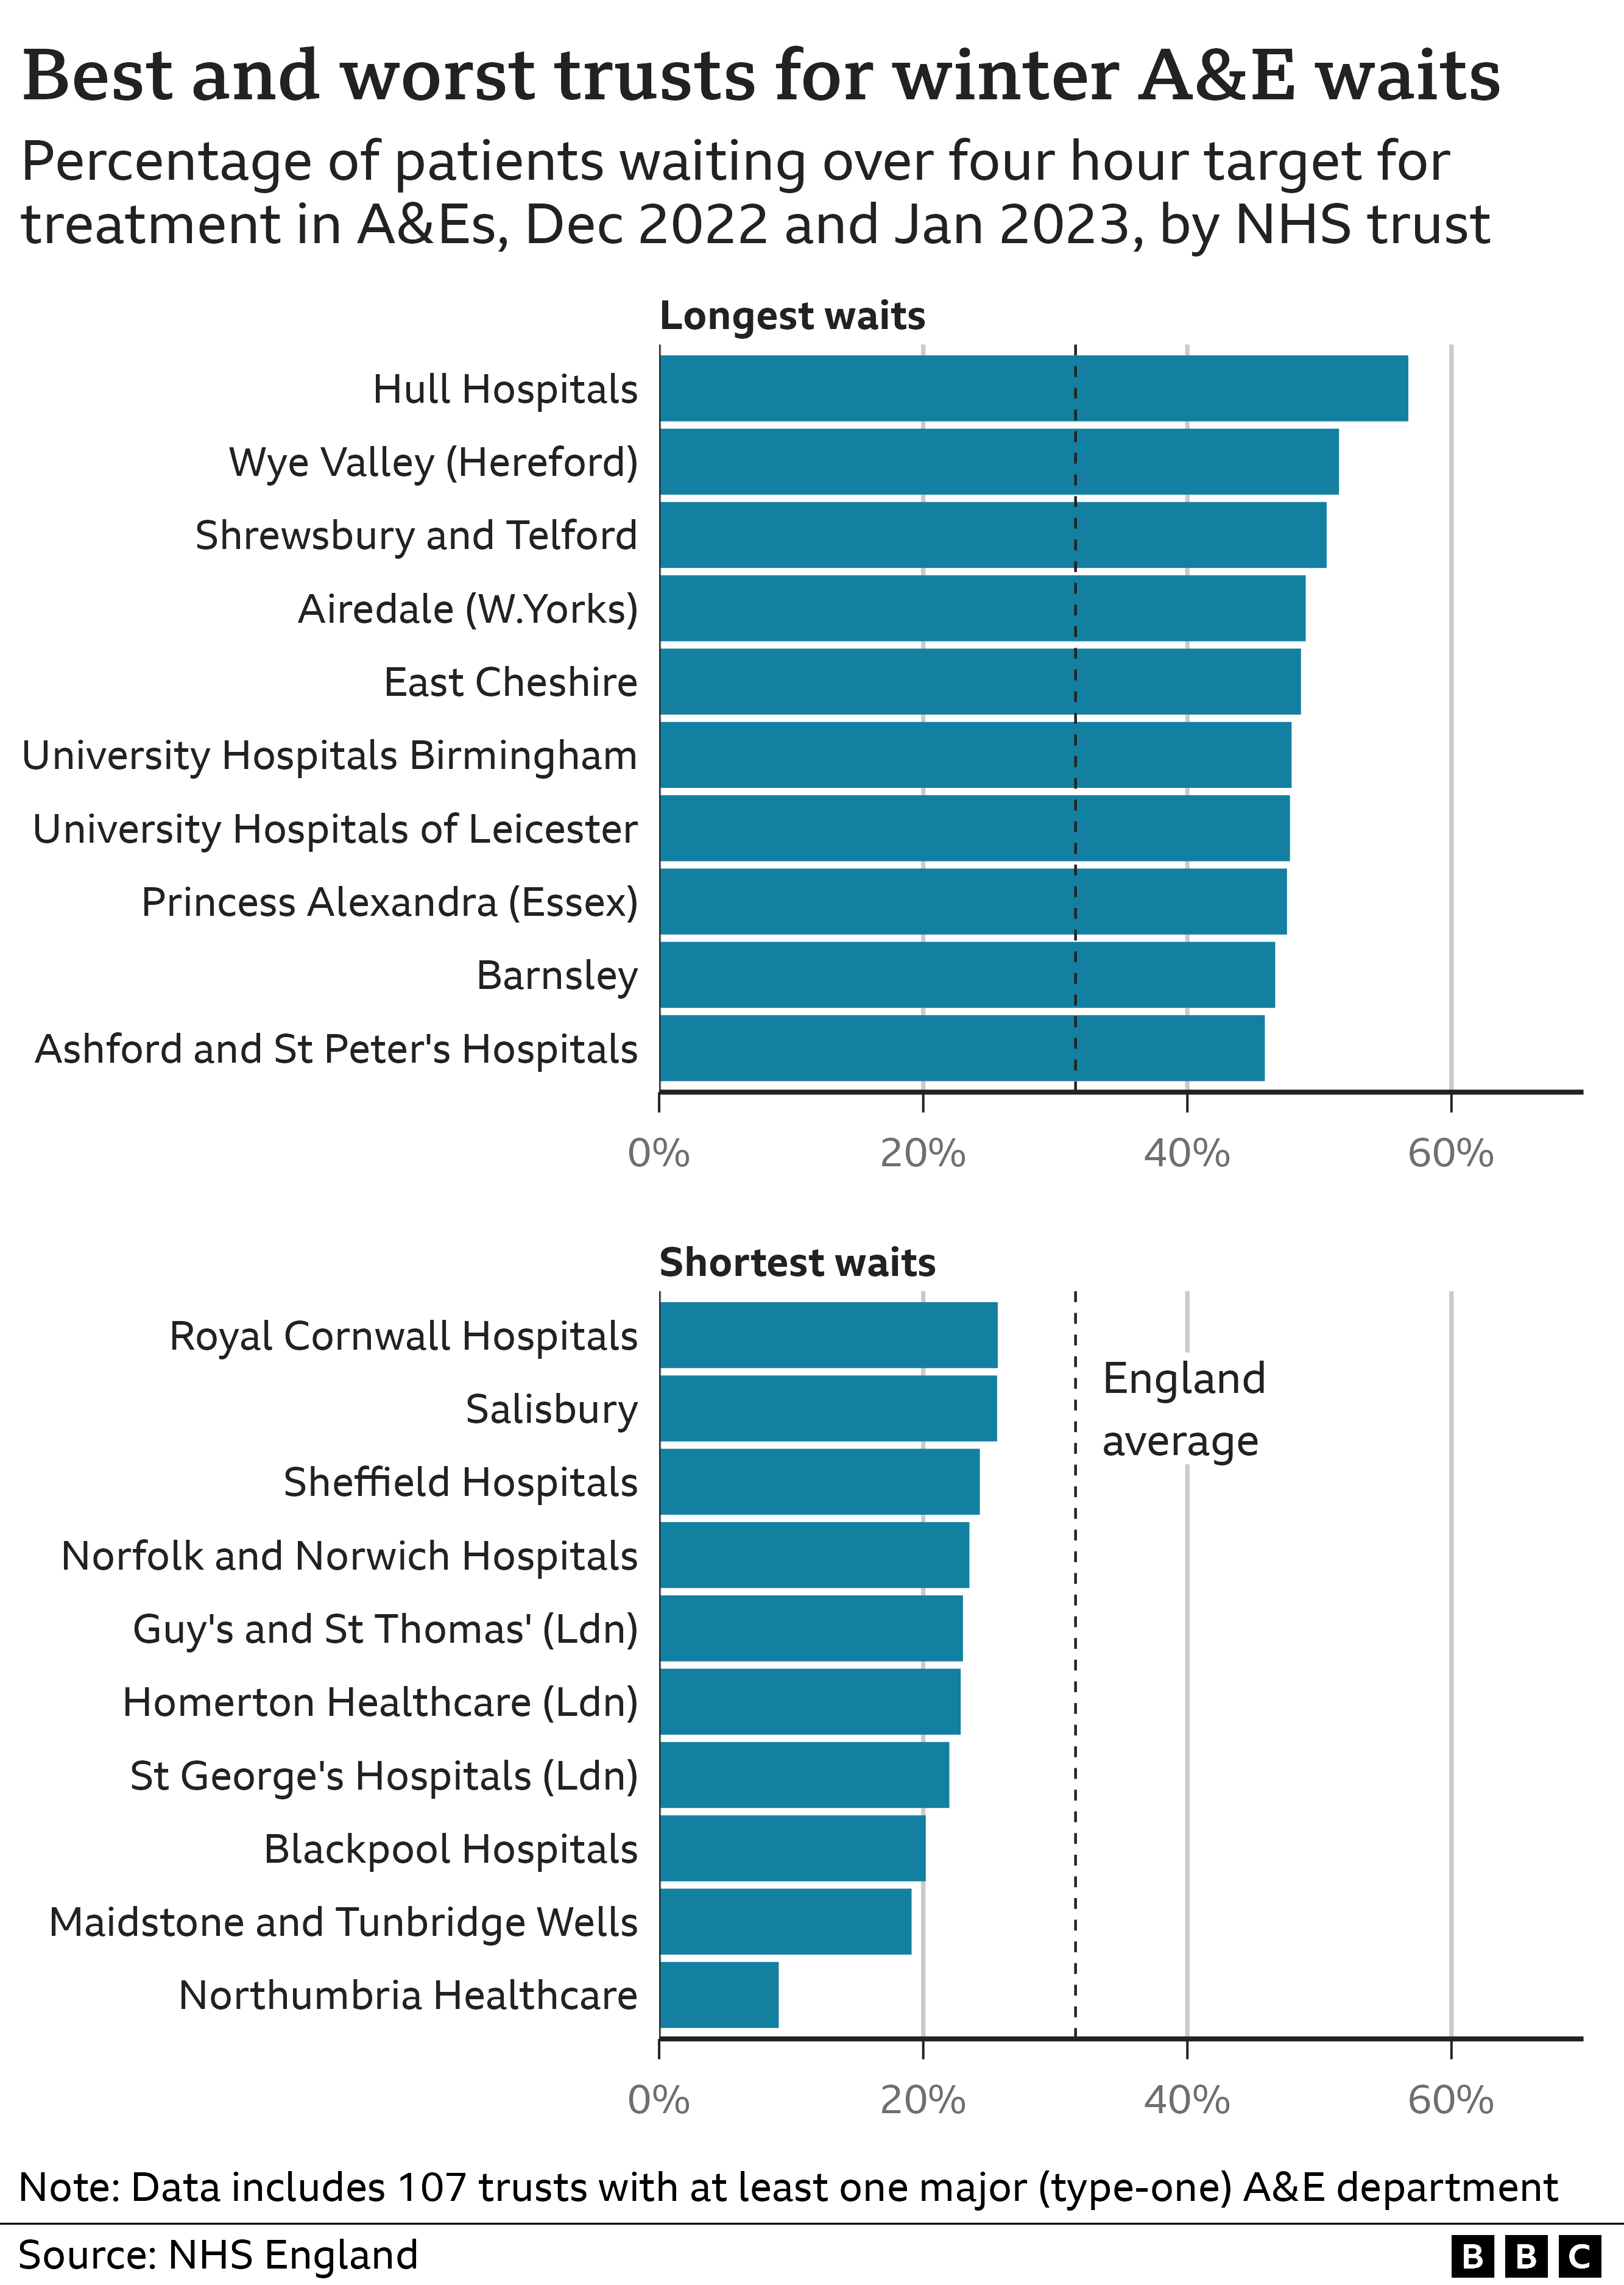 Bar chart showing the 10 NHS trusts with the longest A&E waits between December and January and the 10 NHS trusts with the shortest A&E waits between December and January. Hull Hospitals had the longest wait, at 57%, and Northumbria has the shortest at 9%. The average for England was 32%.